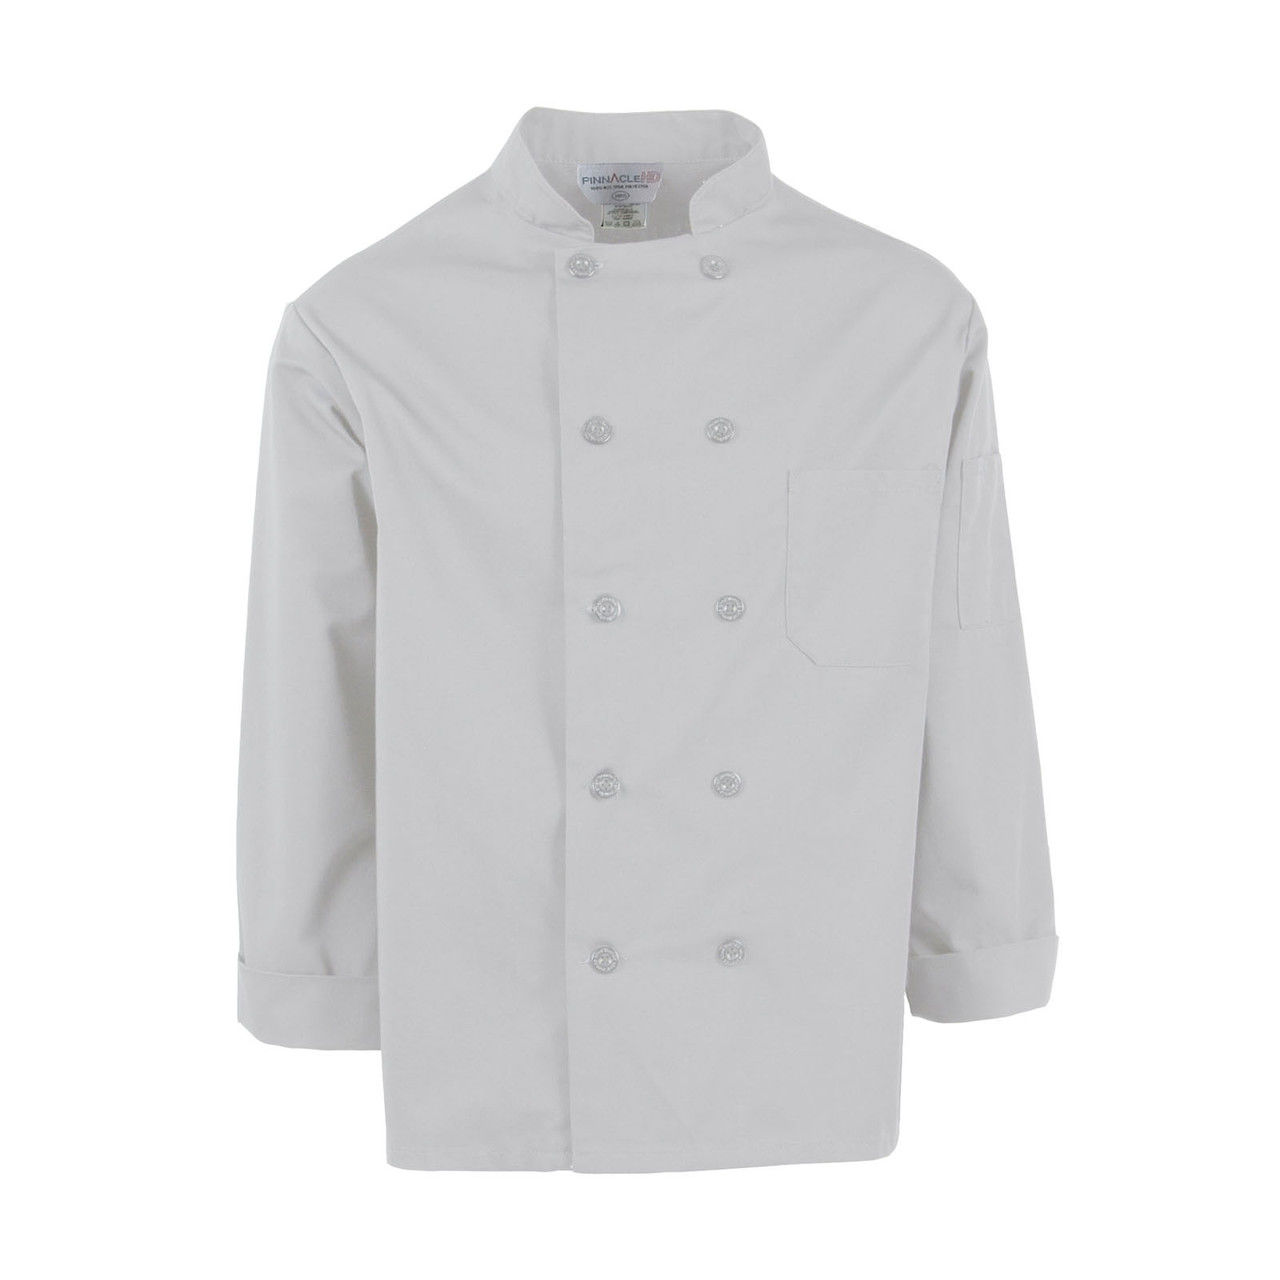 Where will my pinnacle chef coats be shipped from?